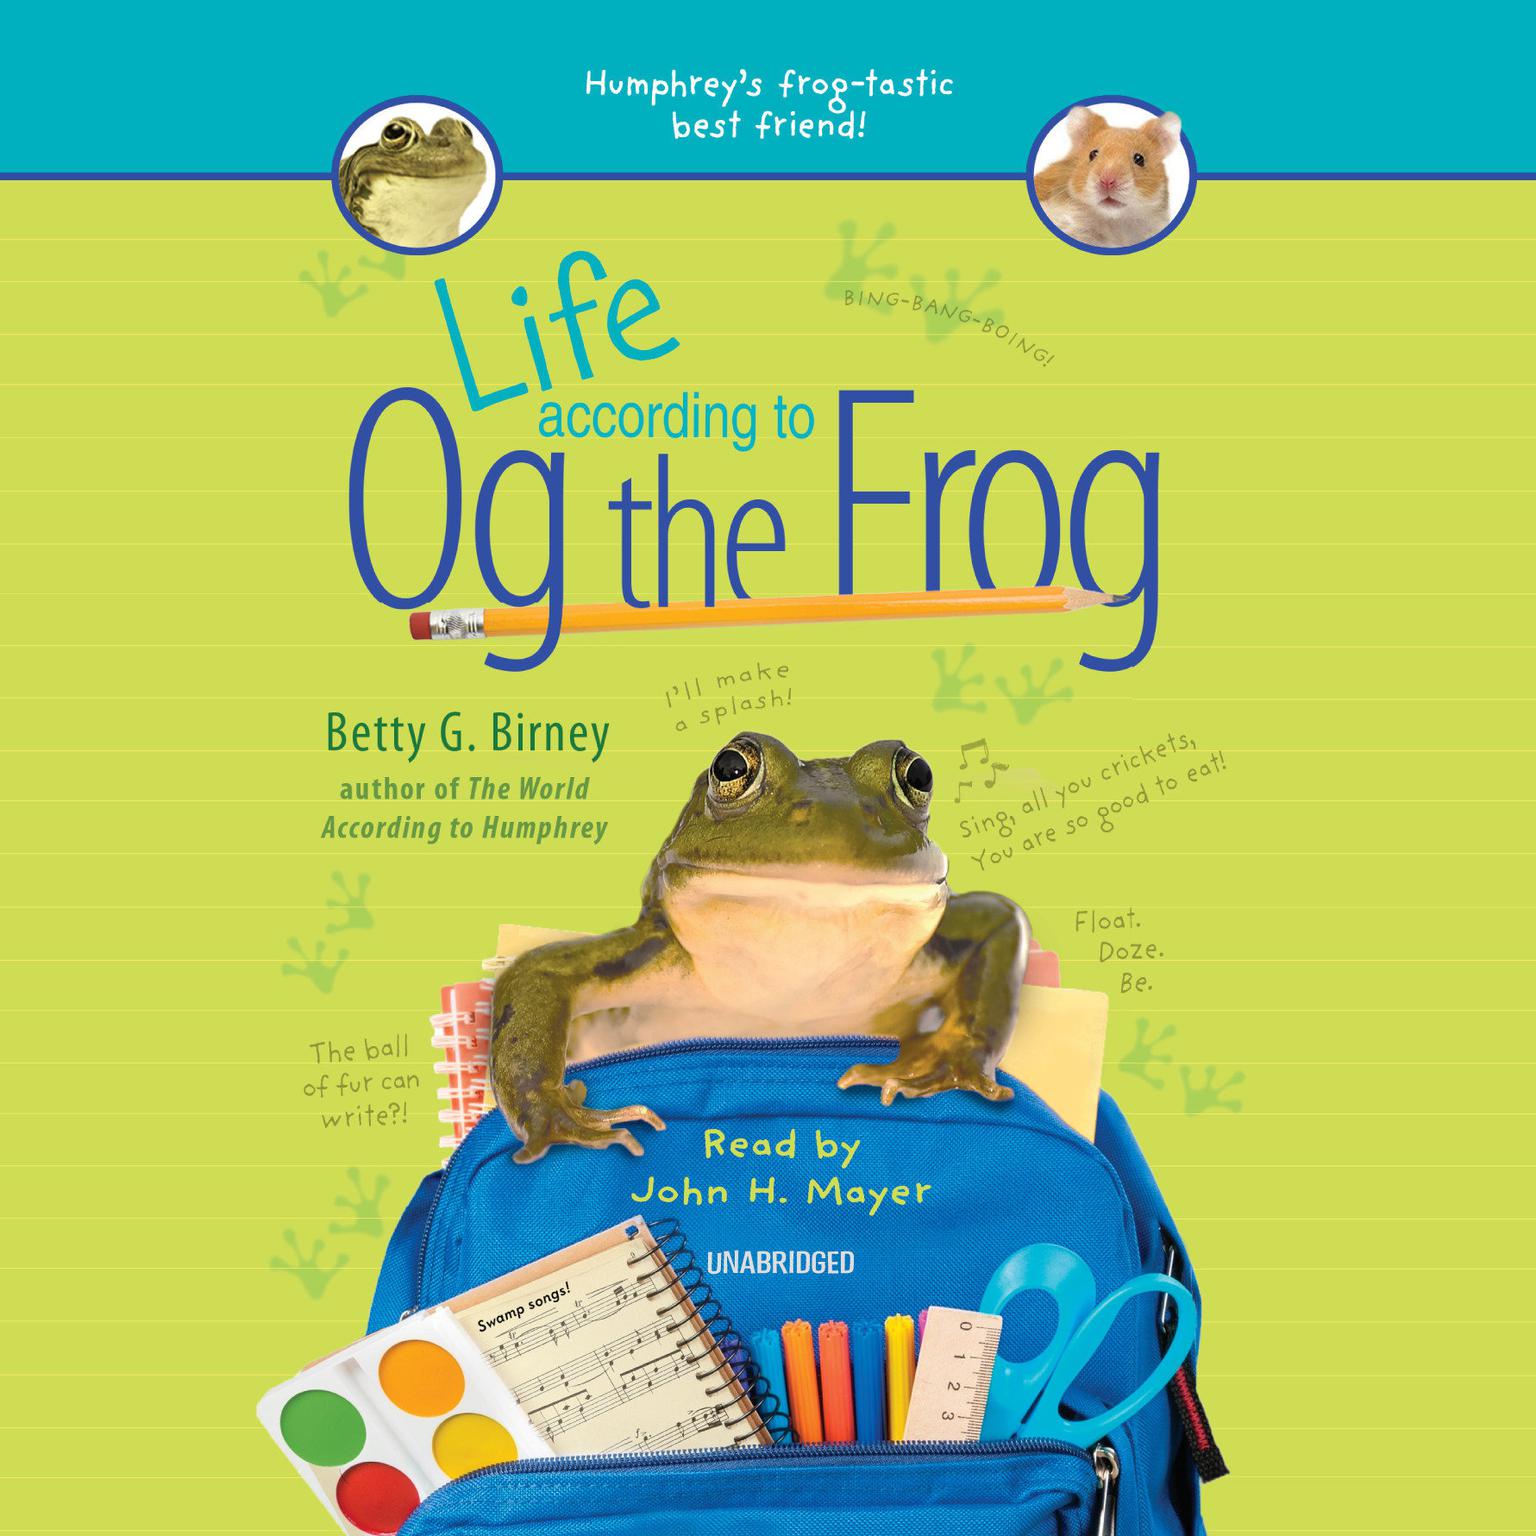 Life According to Og the Frog Audiobook, by Betty G. Birney